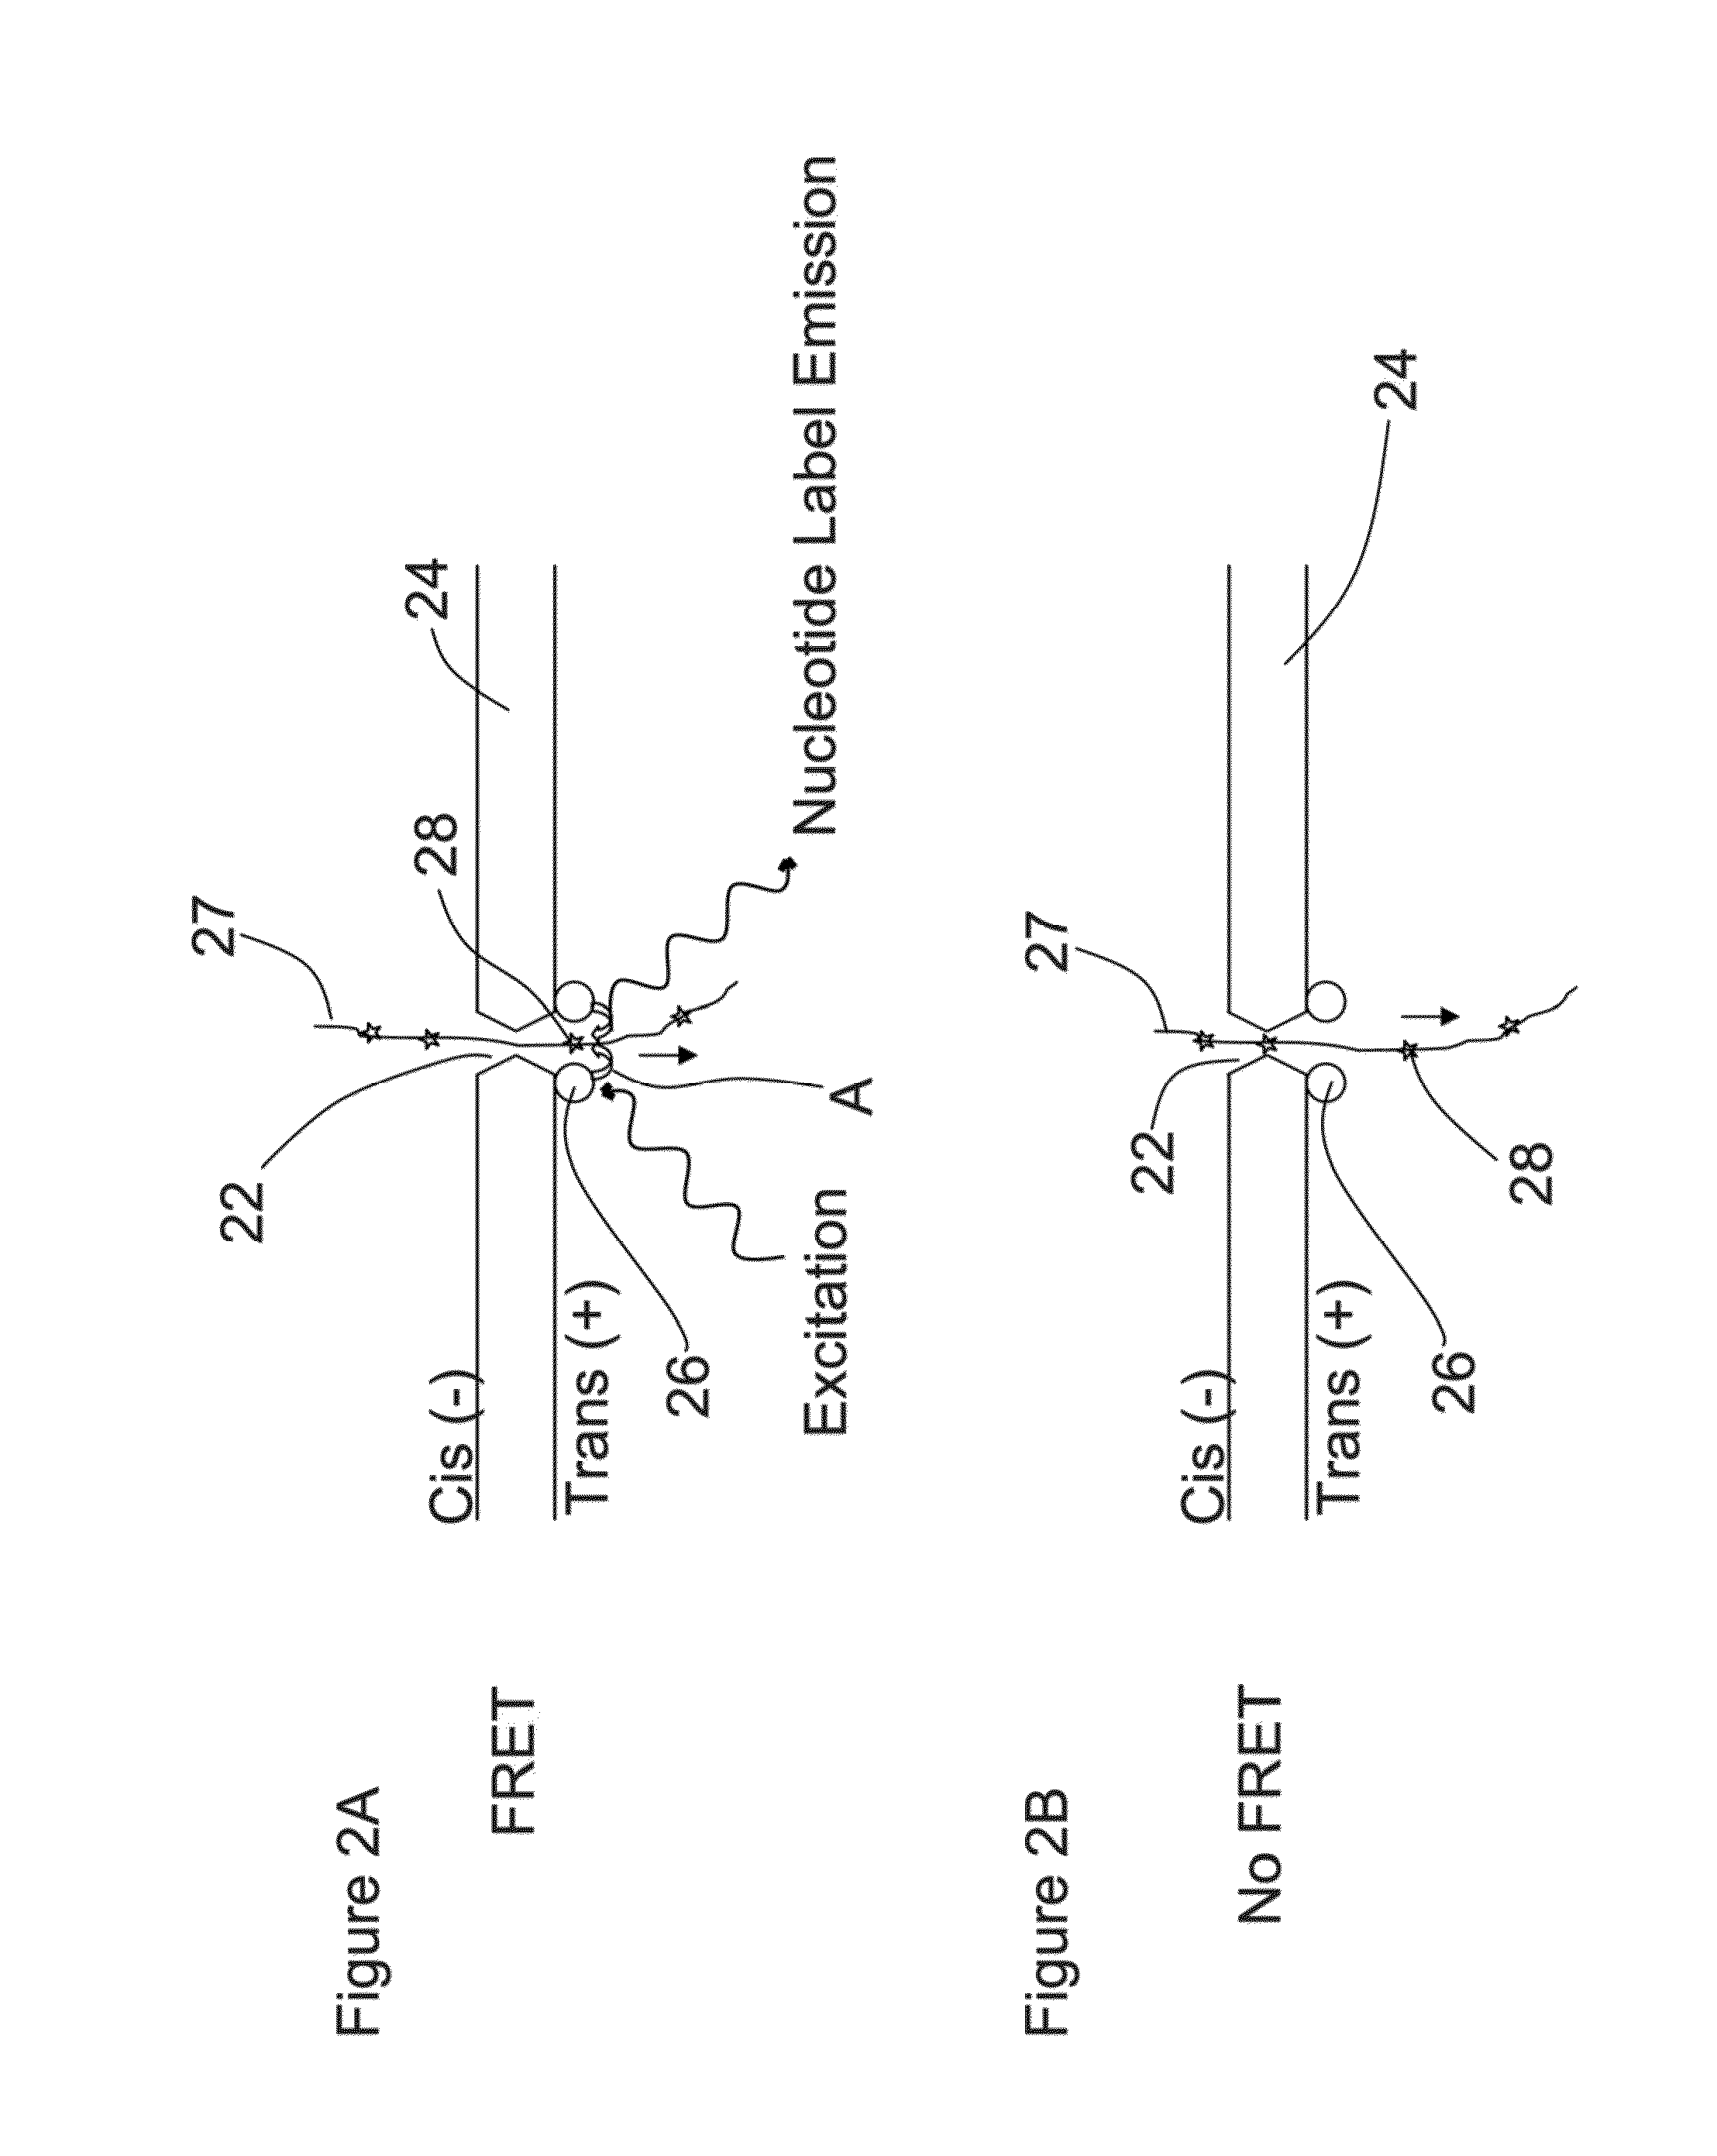 Apparatus and methods for performing optical nanopore detection or sequencing